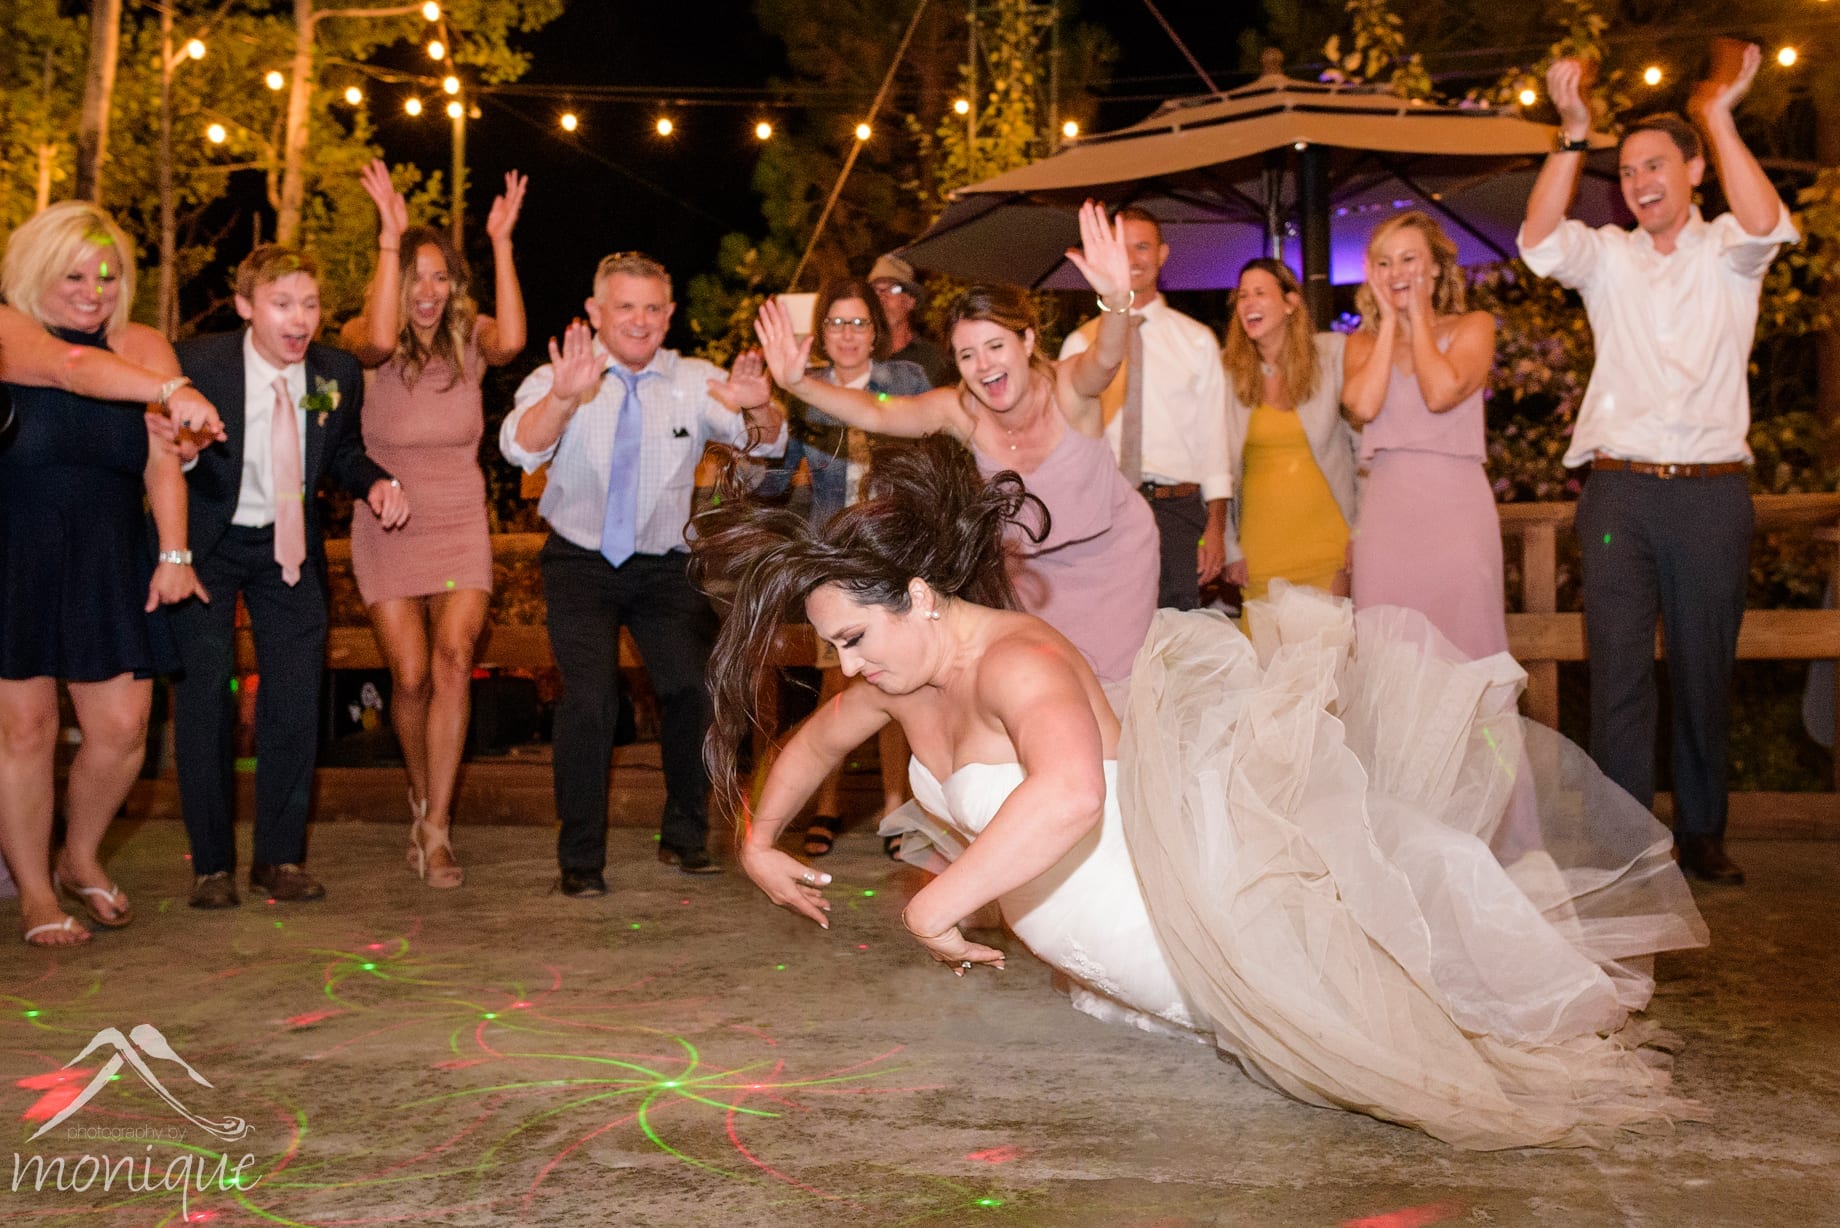 Twenty Mile House wedding photography with the bride doing the Worm on the dance floor in her wedding dress